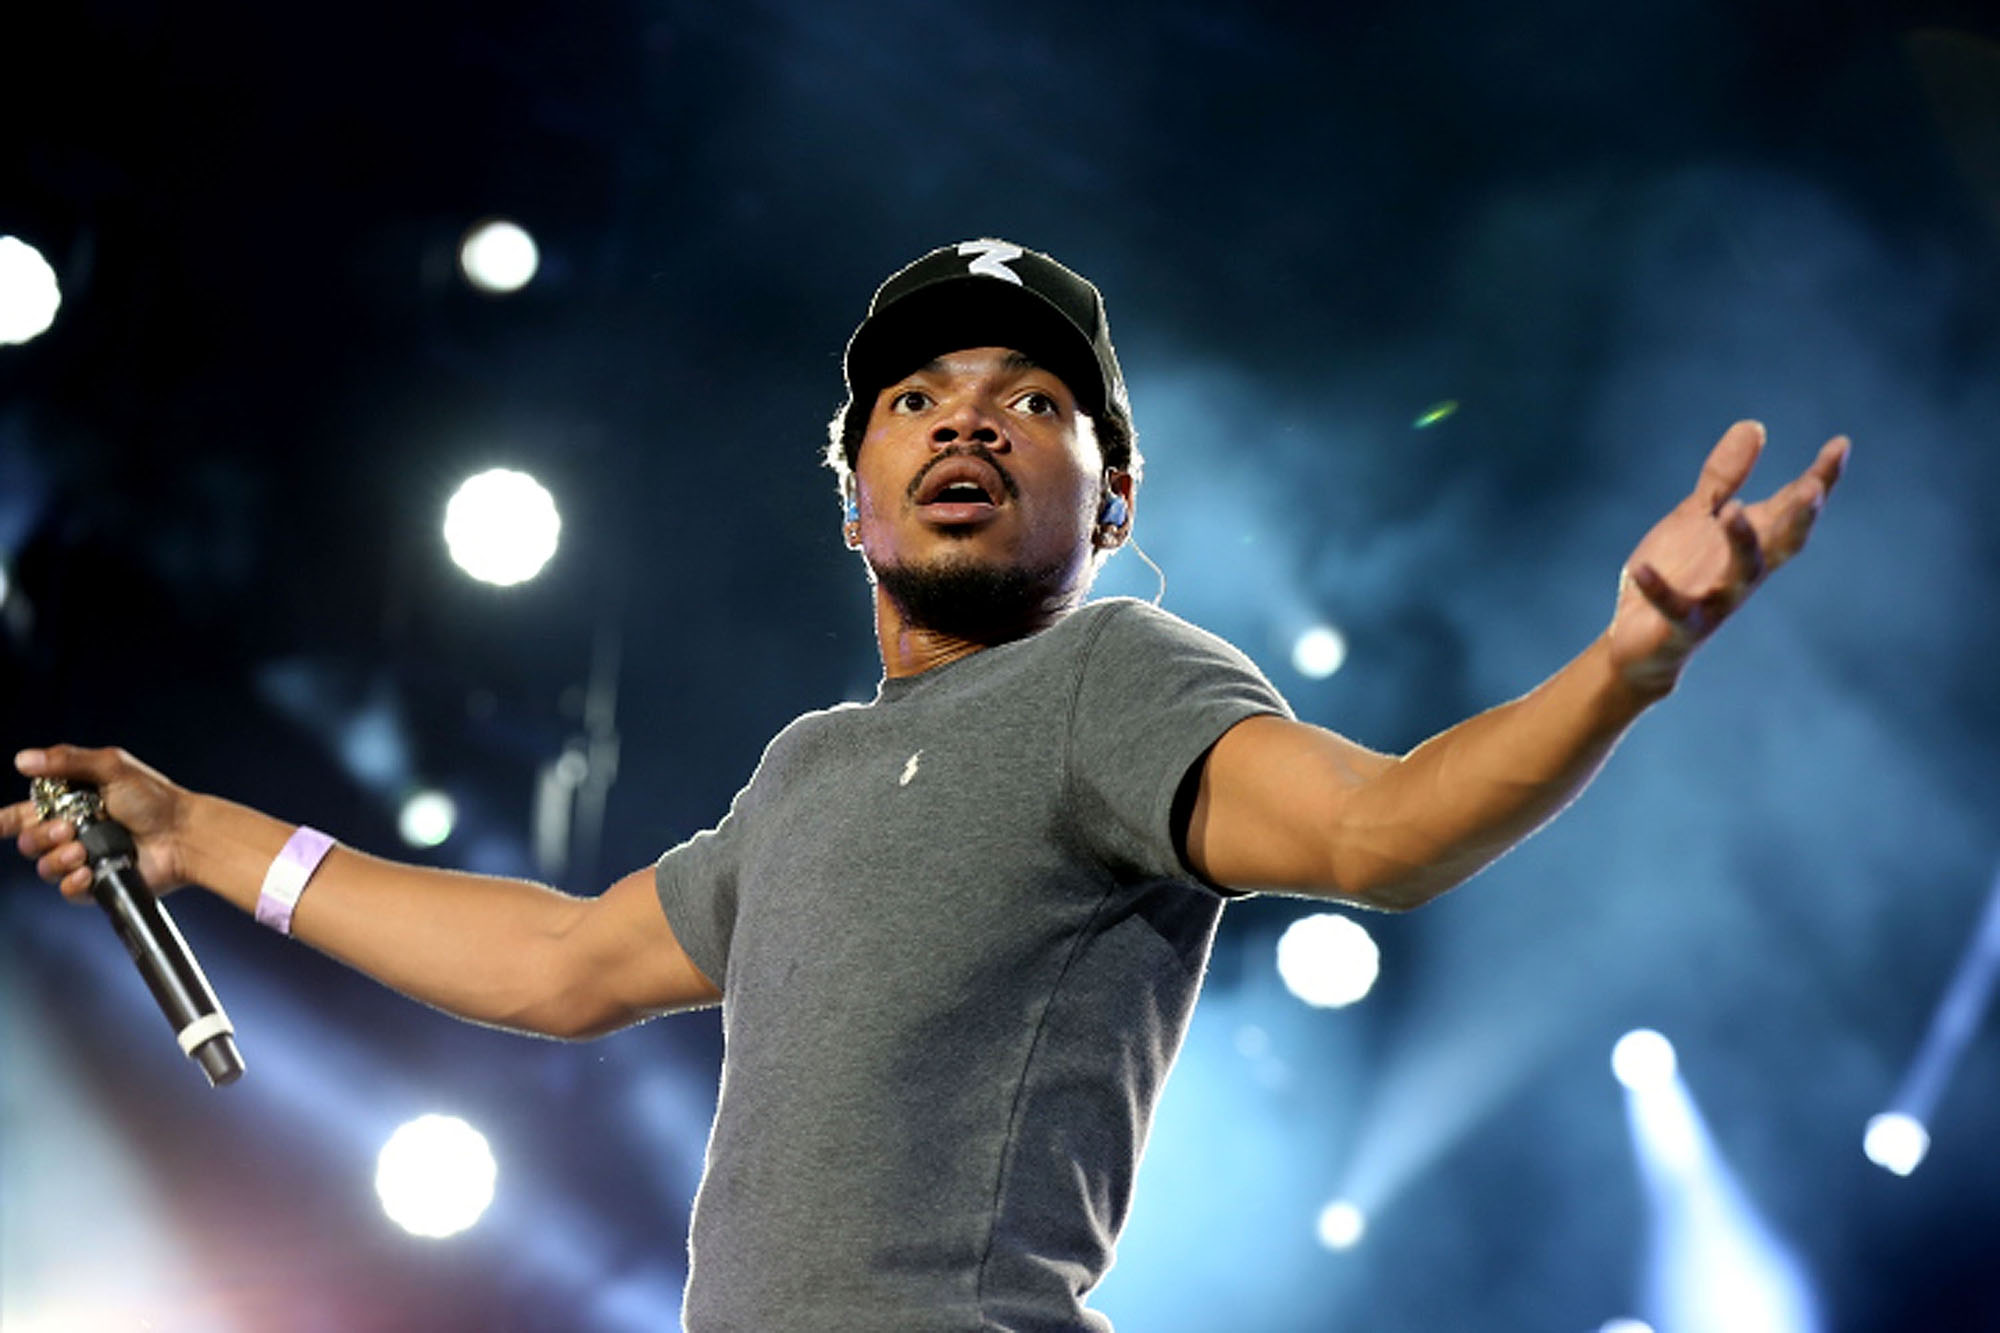 Chance the Rapper performs 2016 Made In America Festival - Day 2 on September 4, 2016 in Philadelphia, Pennsylvania.  (Photo by Shareif Ziyadat/WireImage) (Shareif Ziyadat—WireImage)